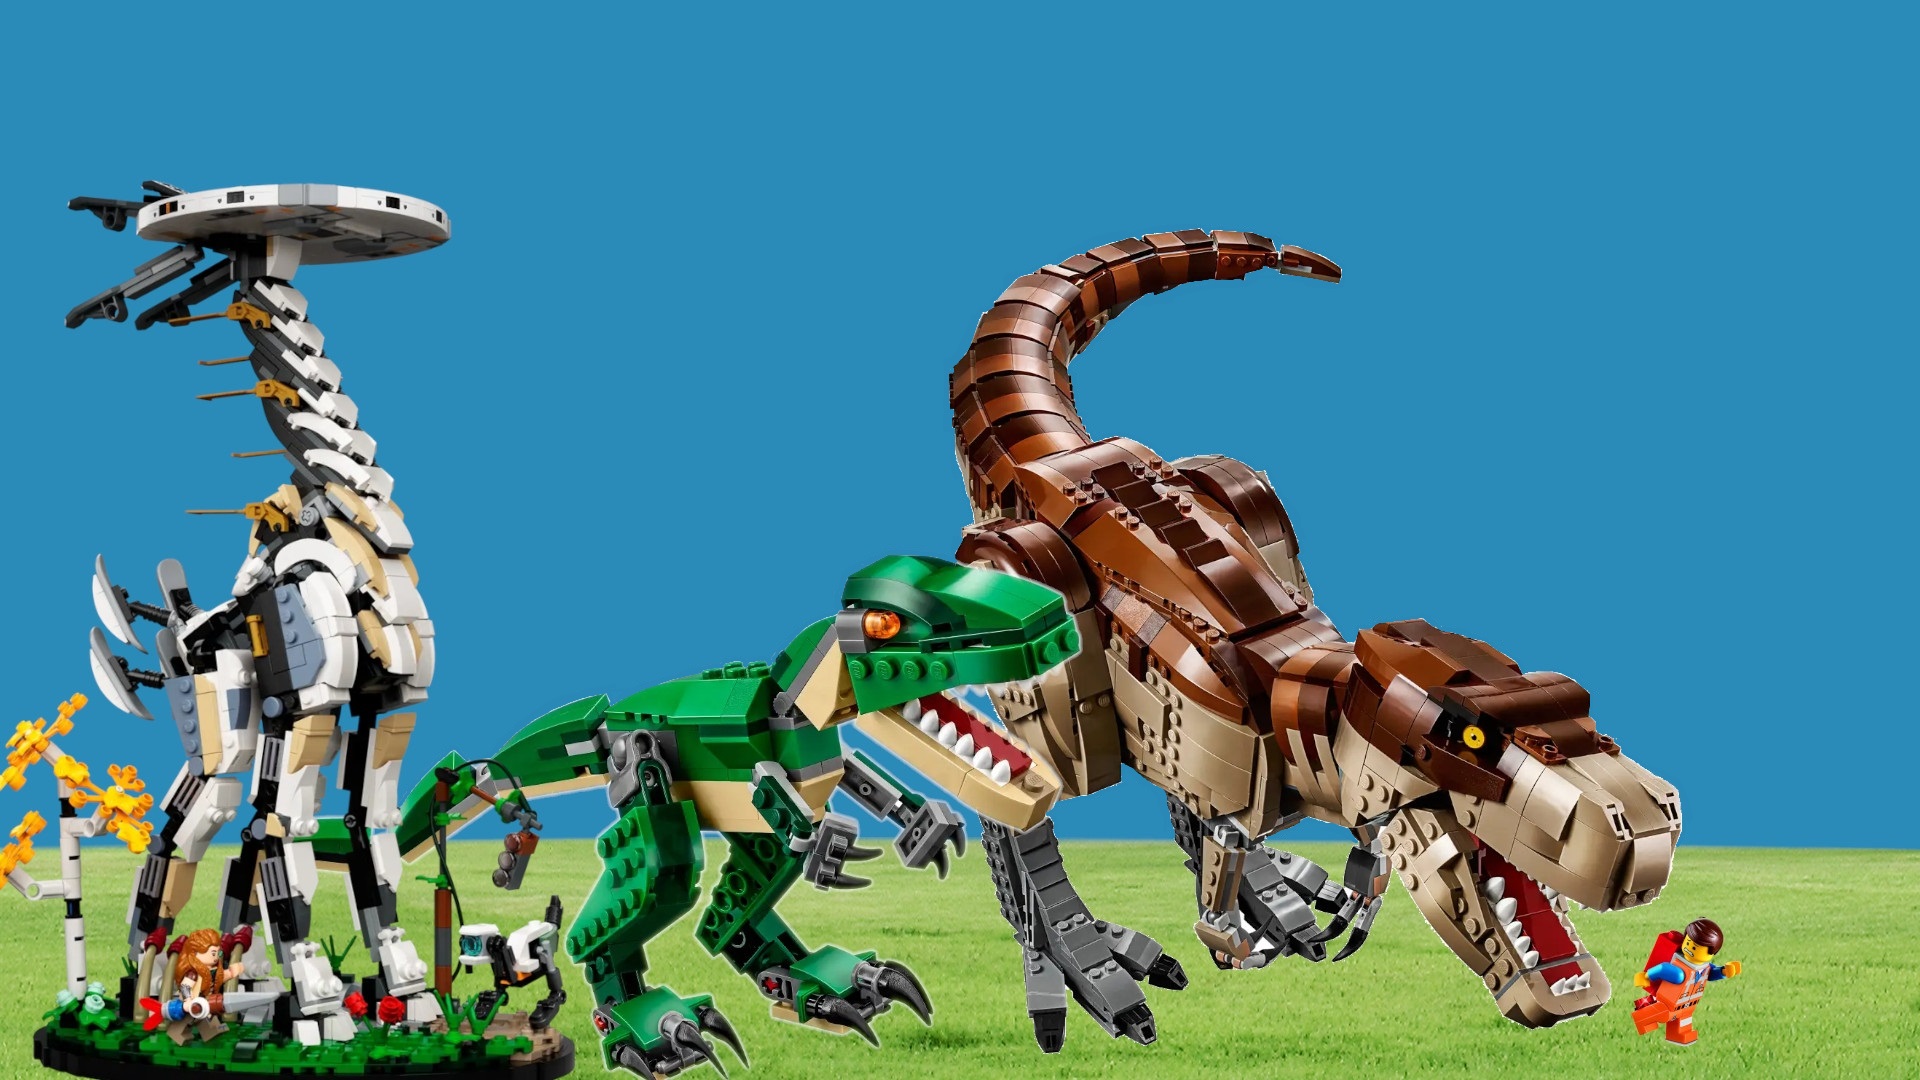 LEGO's dinosaur fossil collection includes a scale model of a T-Rex